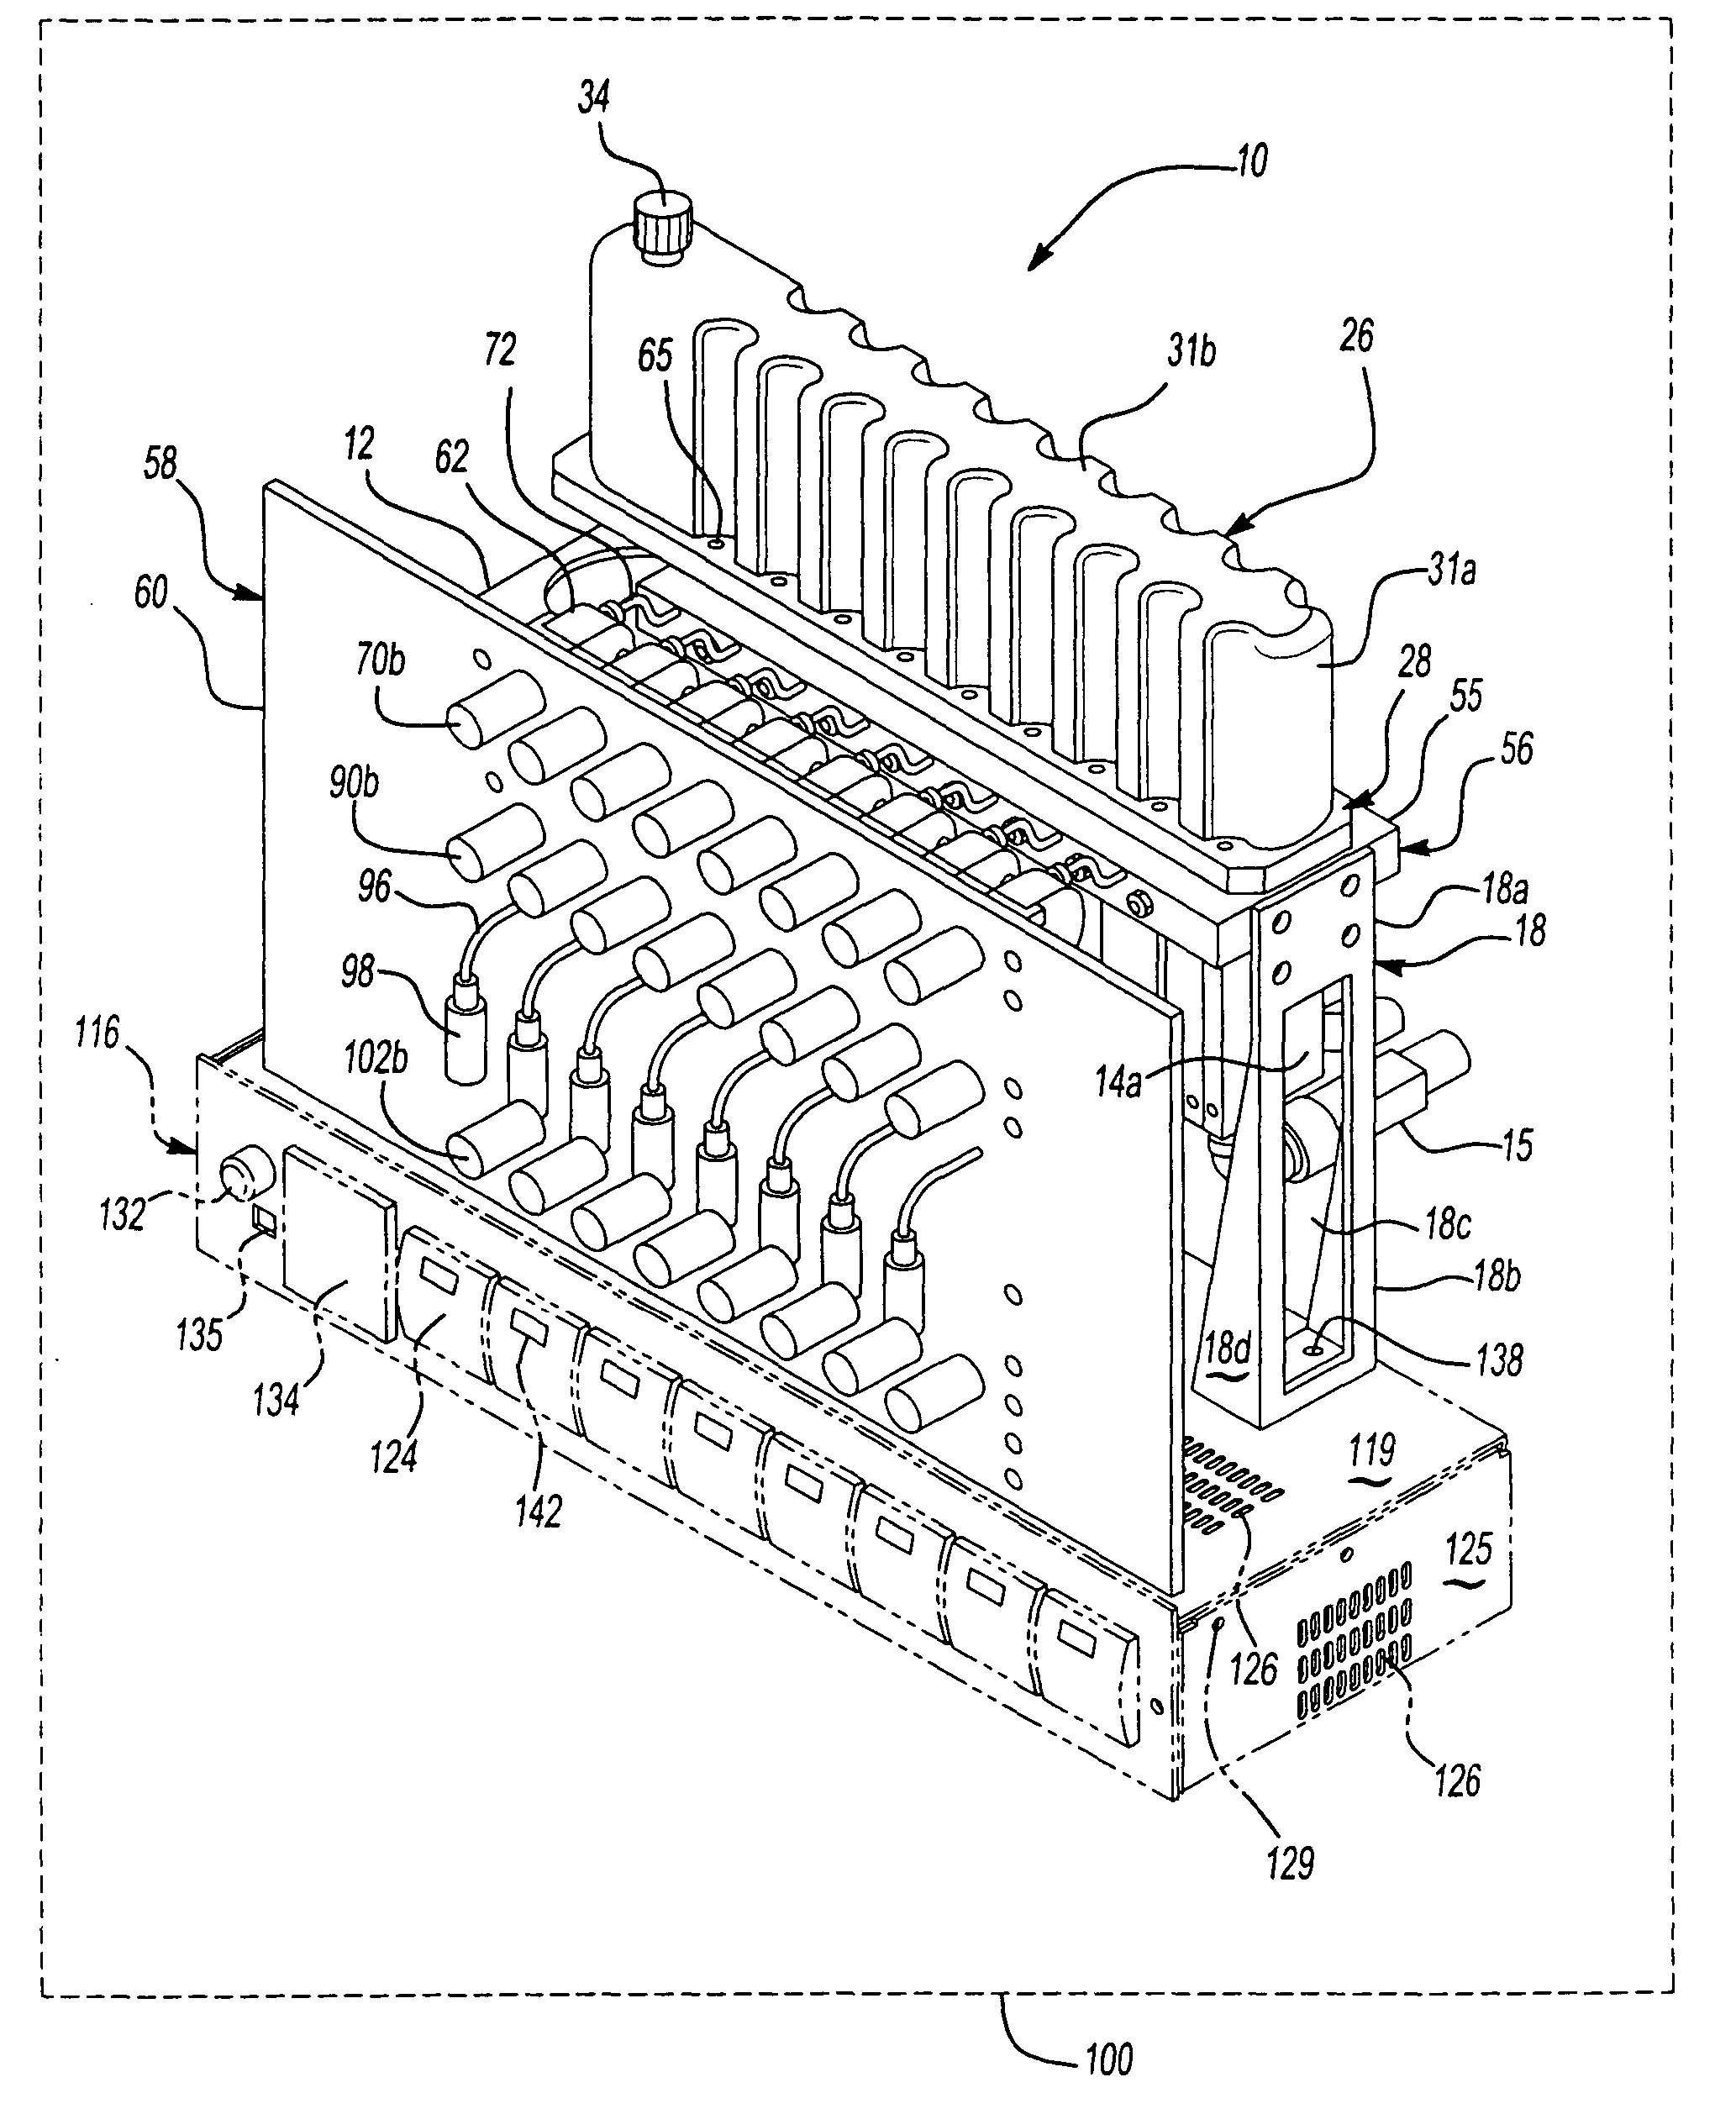 Parallel reactor for sampling and conducting in situ flow-through reactions and a method of using same